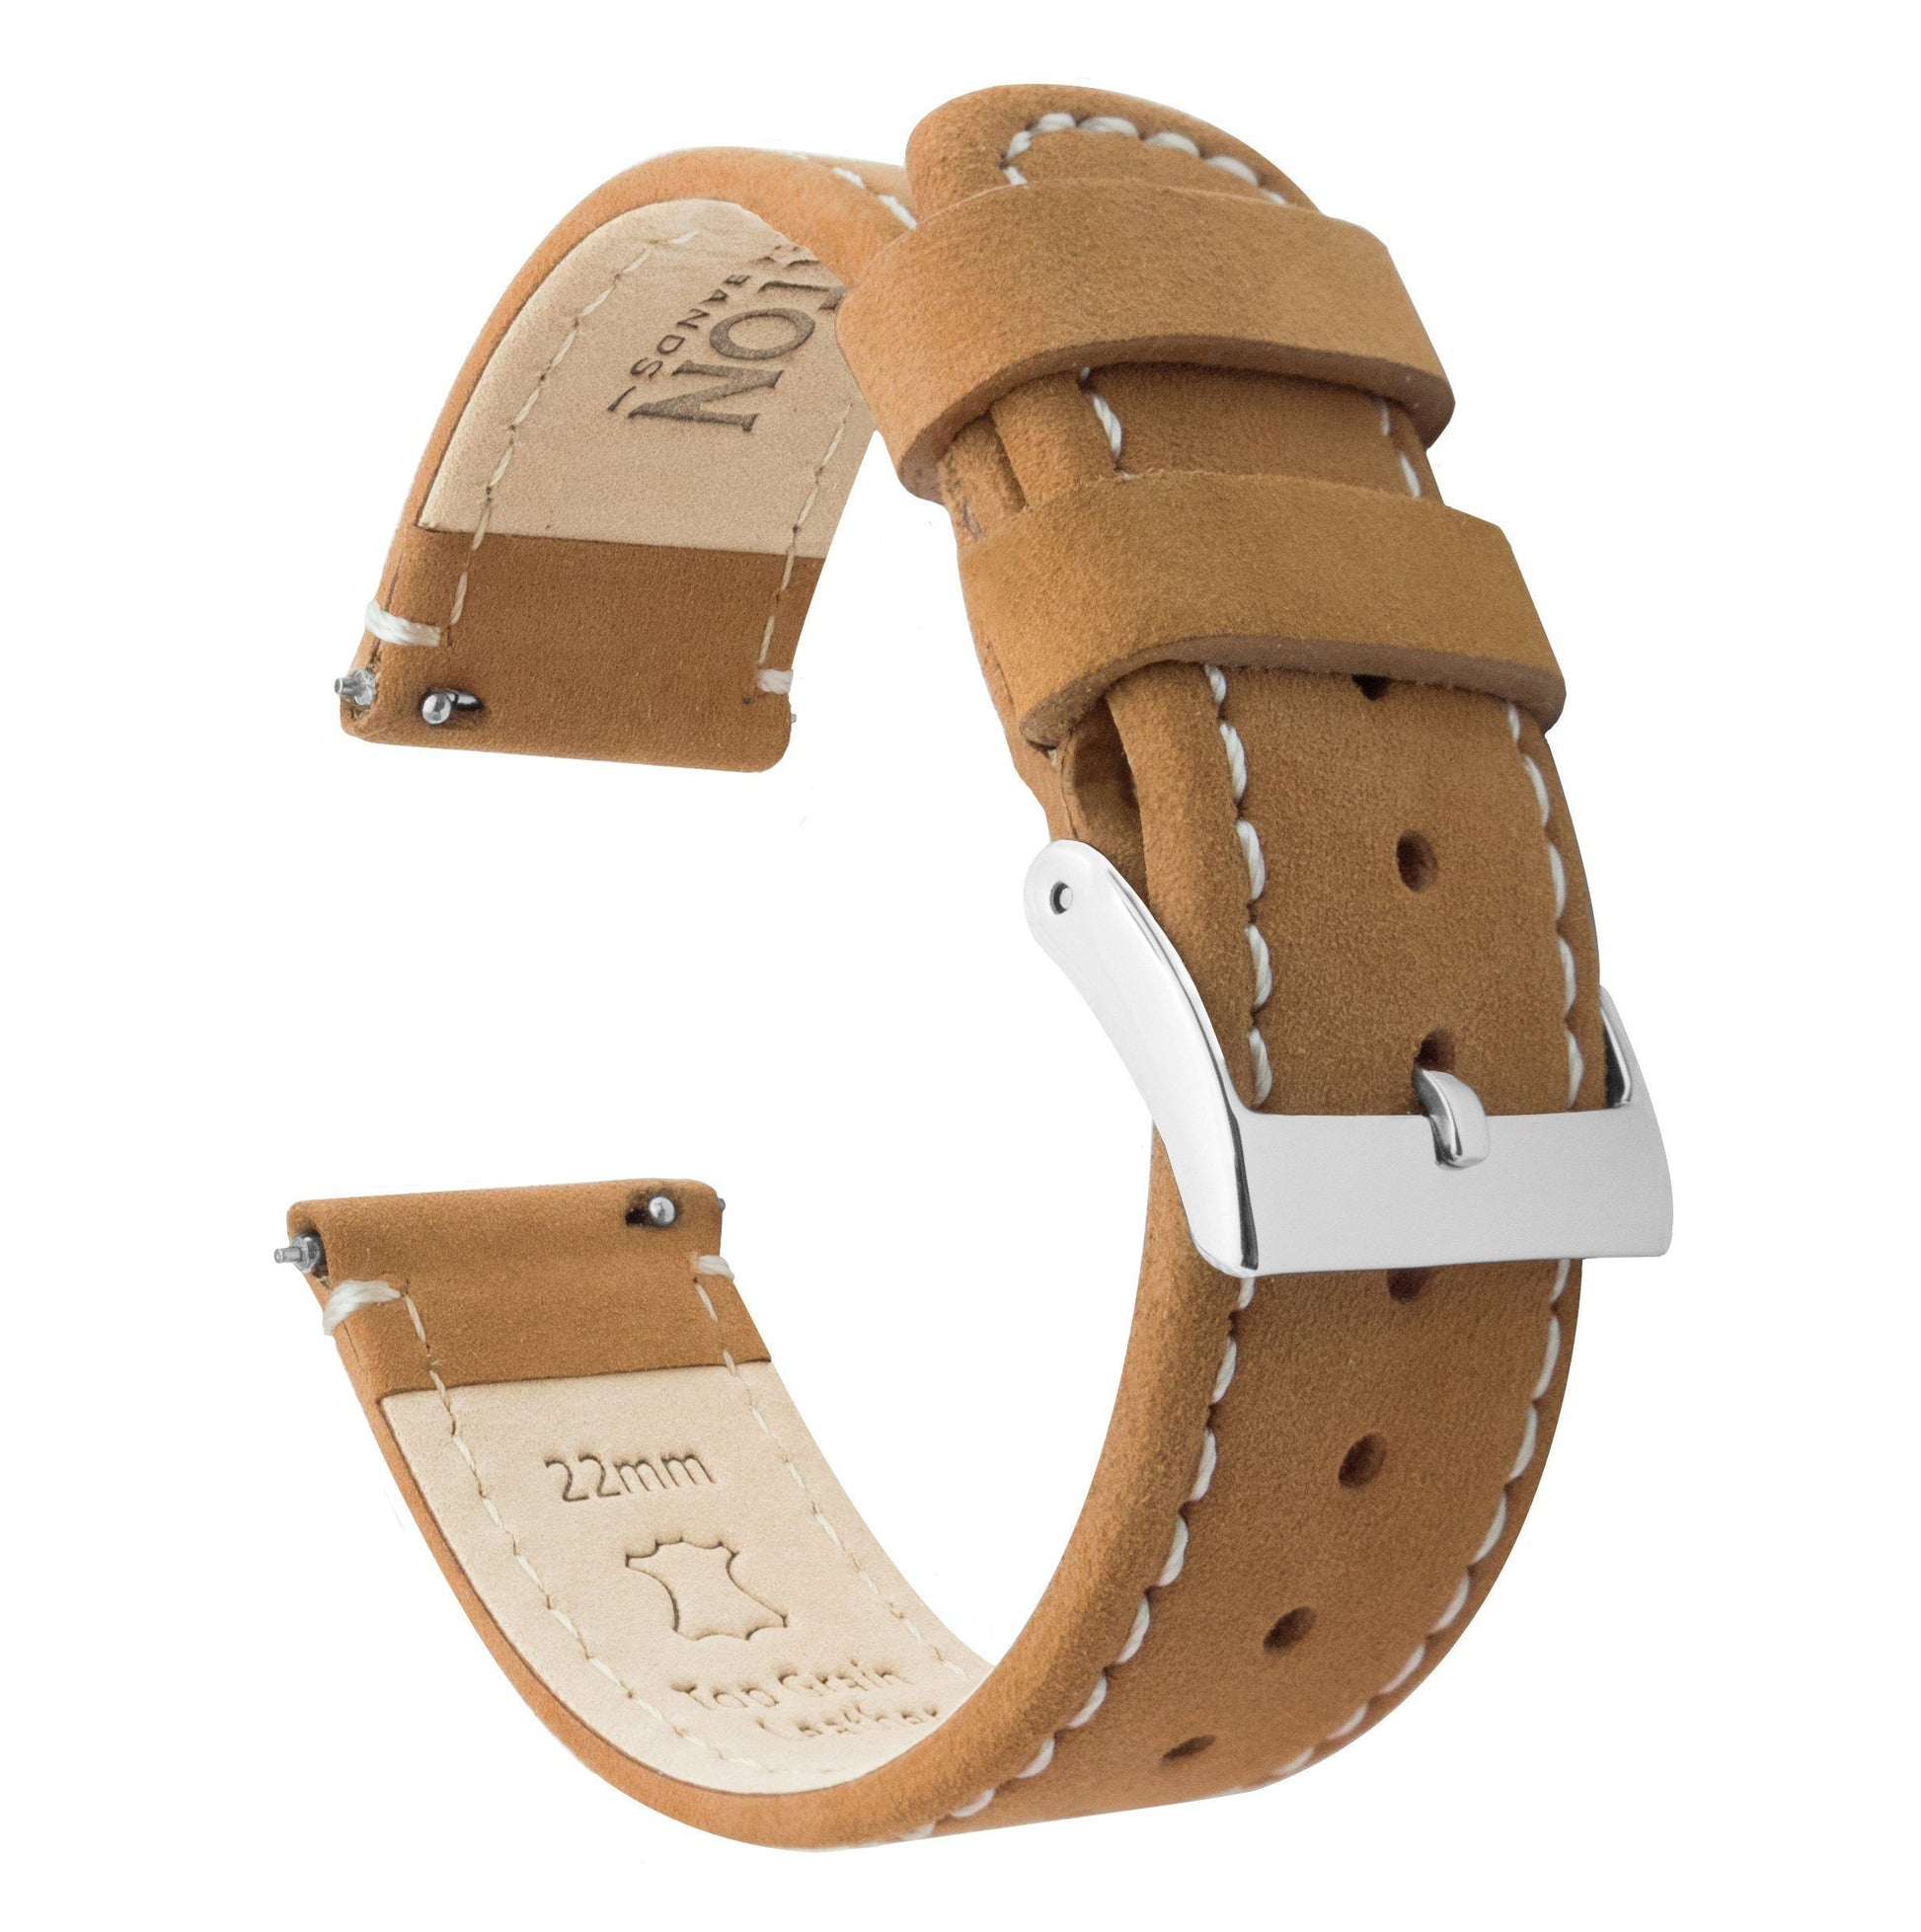 Samsung Galaxy Watch | Gingerbread Brown Leather & Linen White Stitching - Barton Watch Bands